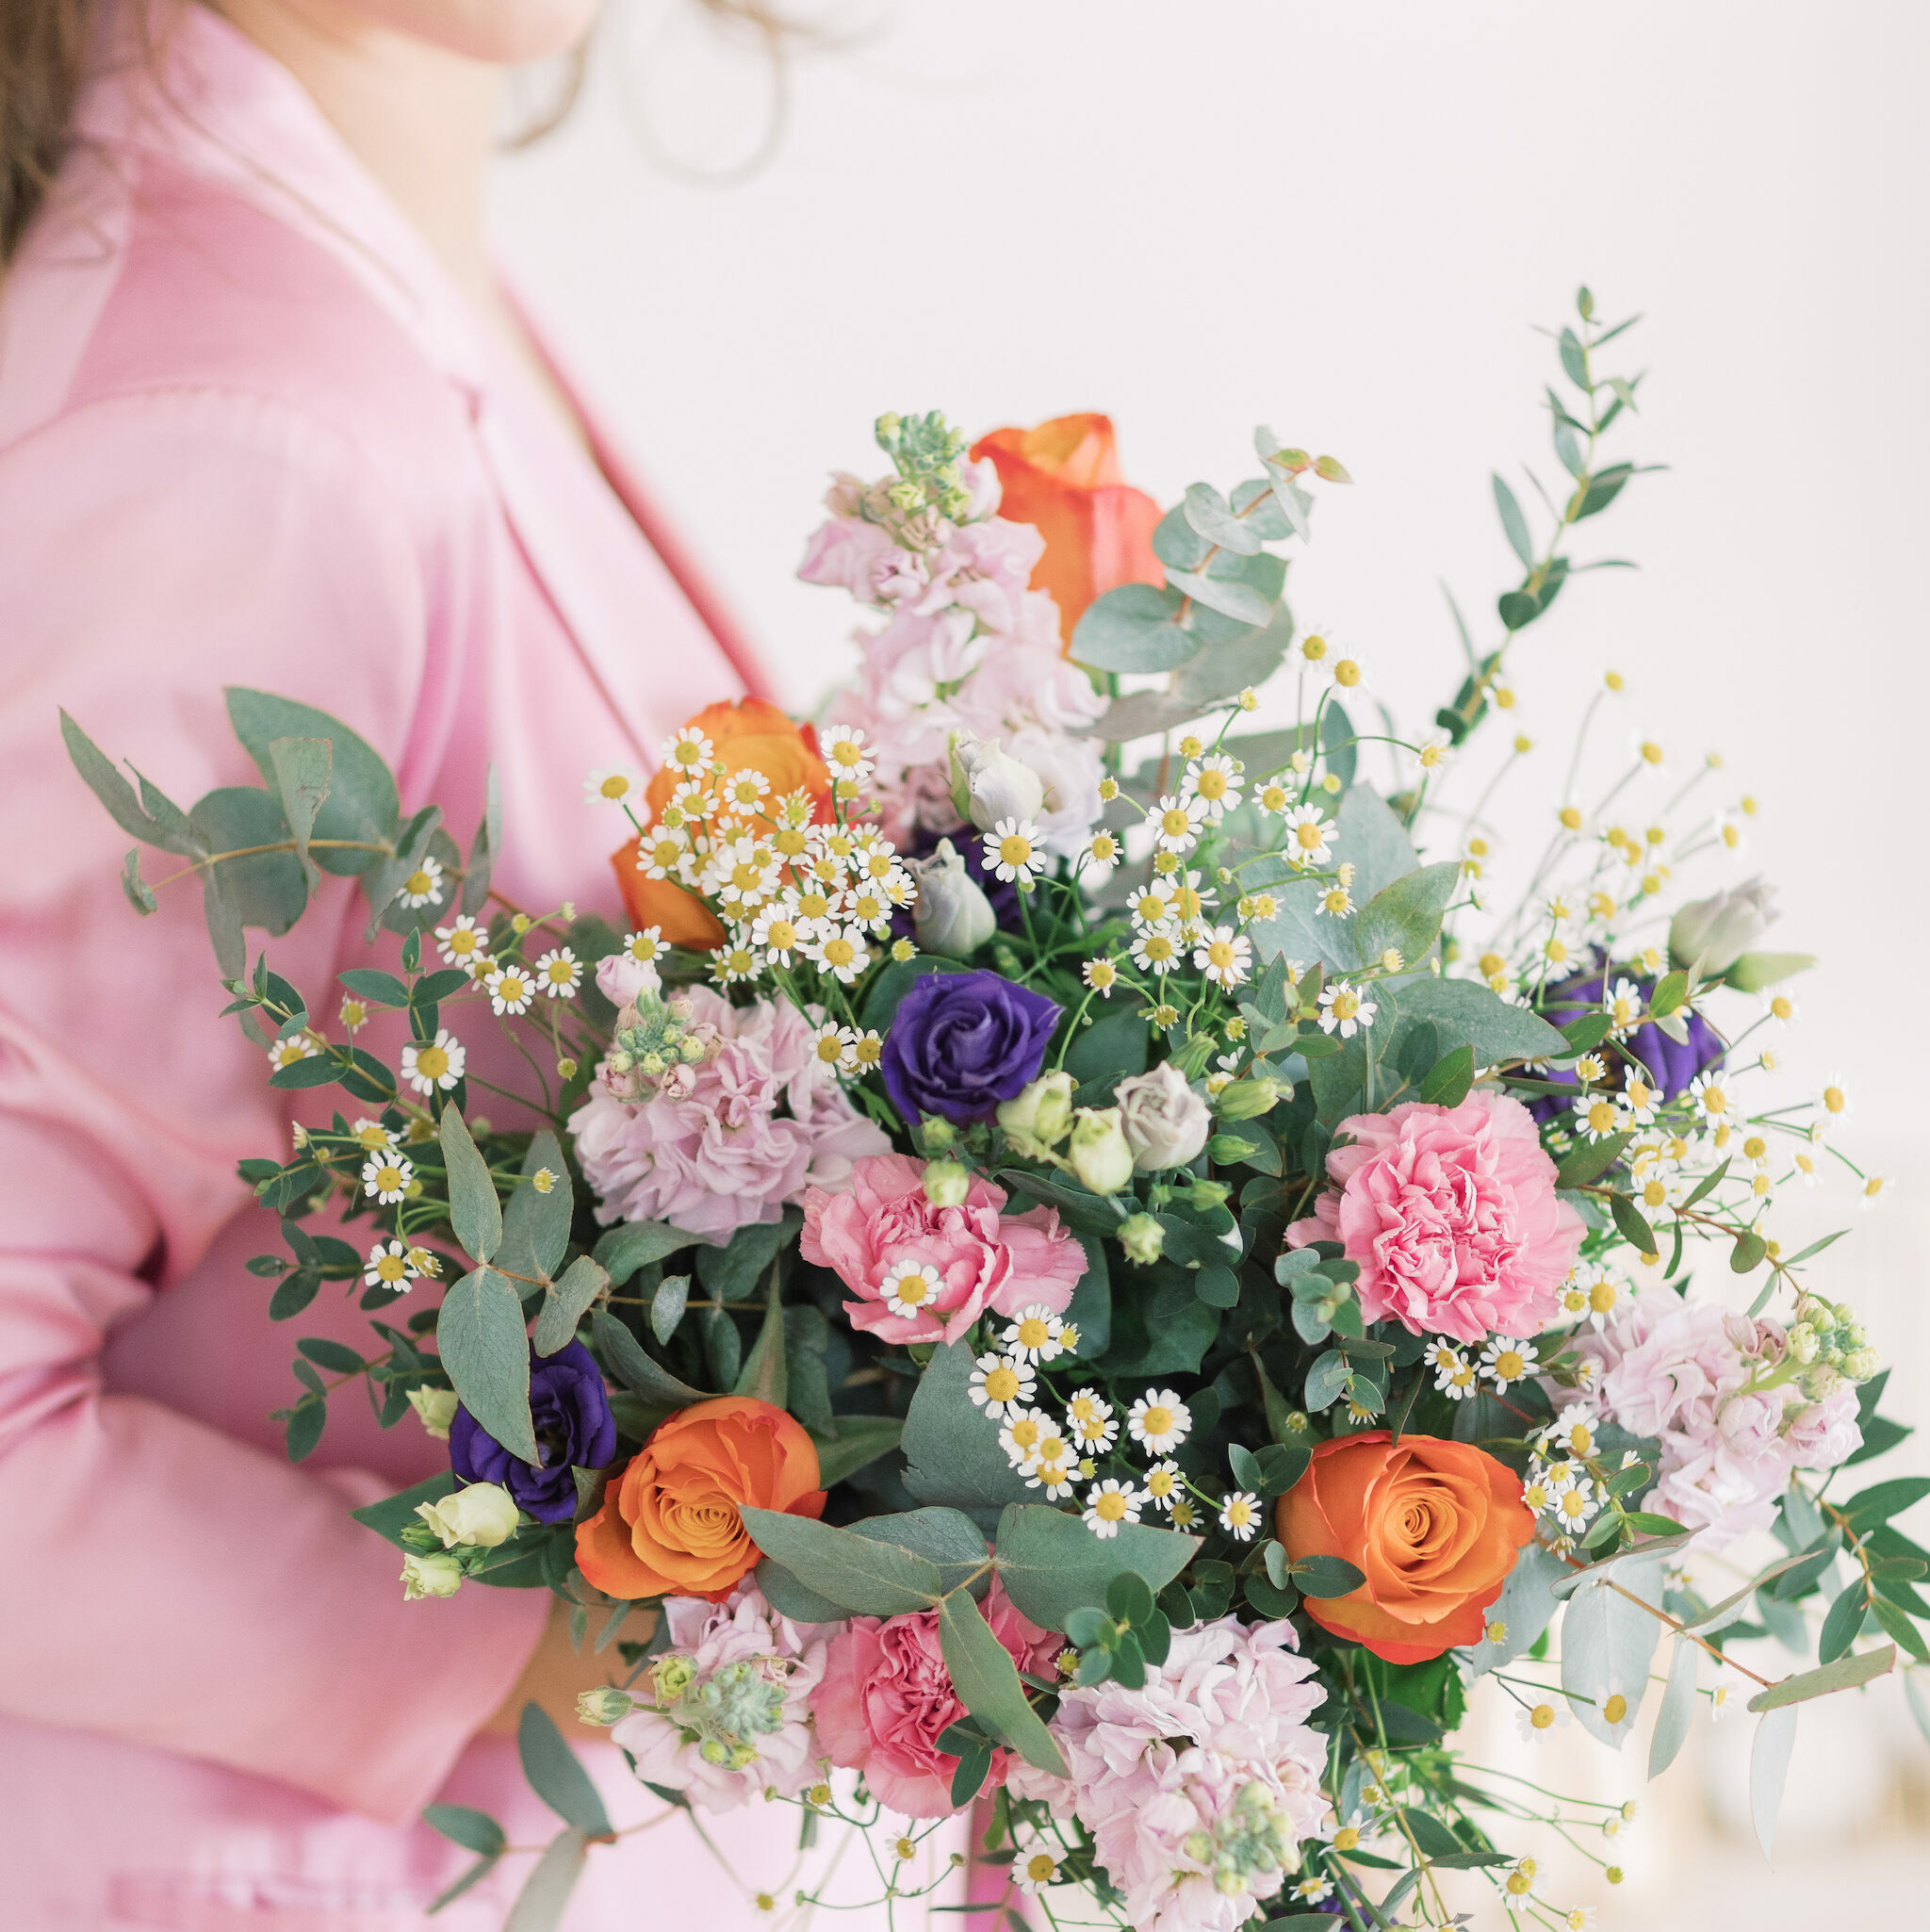 Send a bouquet to Huizingen within 24 hours